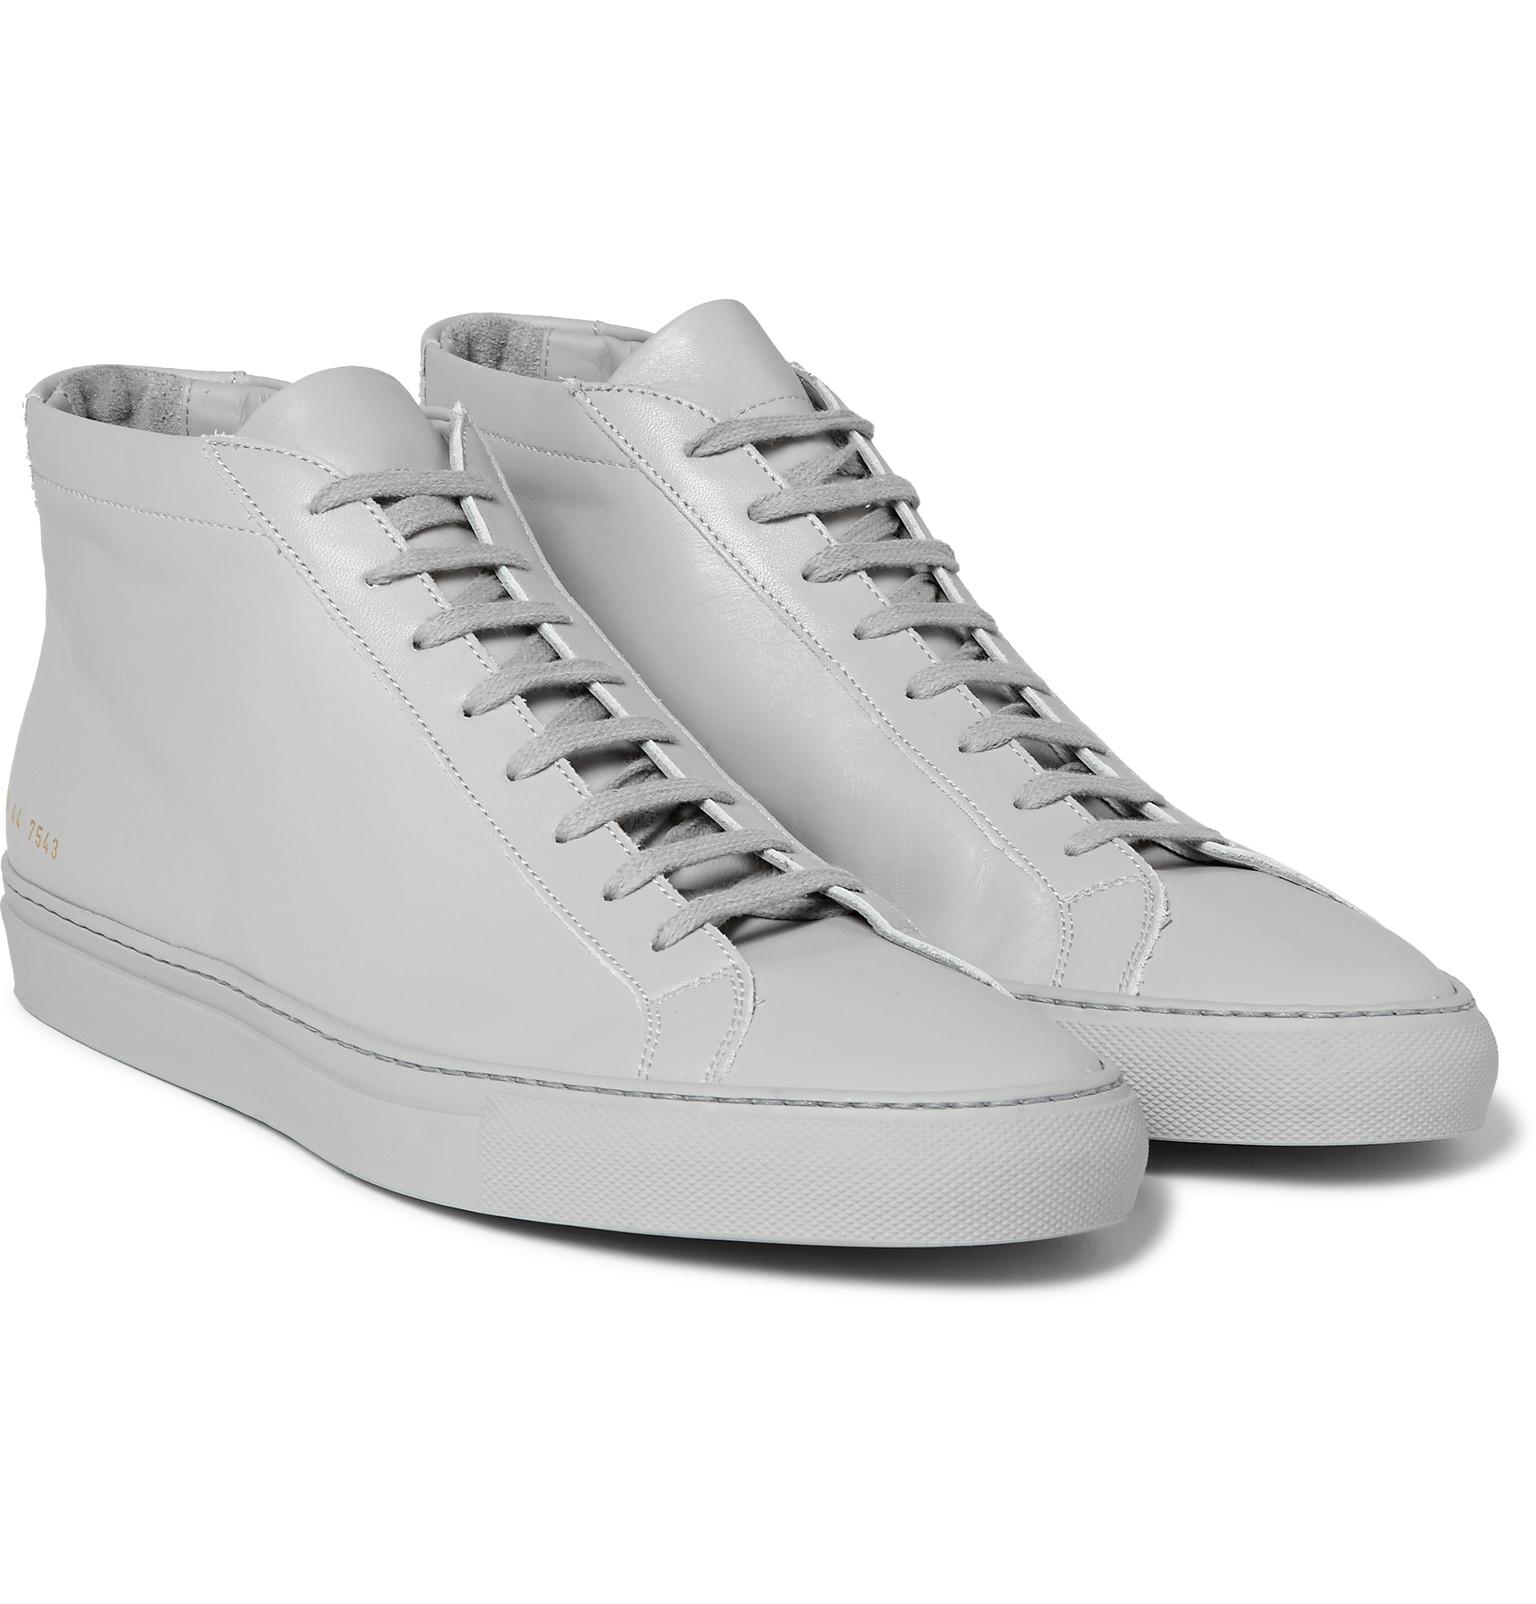 Lyst - Common Projects Original Achilles Mid in Gray for Men - Save 36. ...